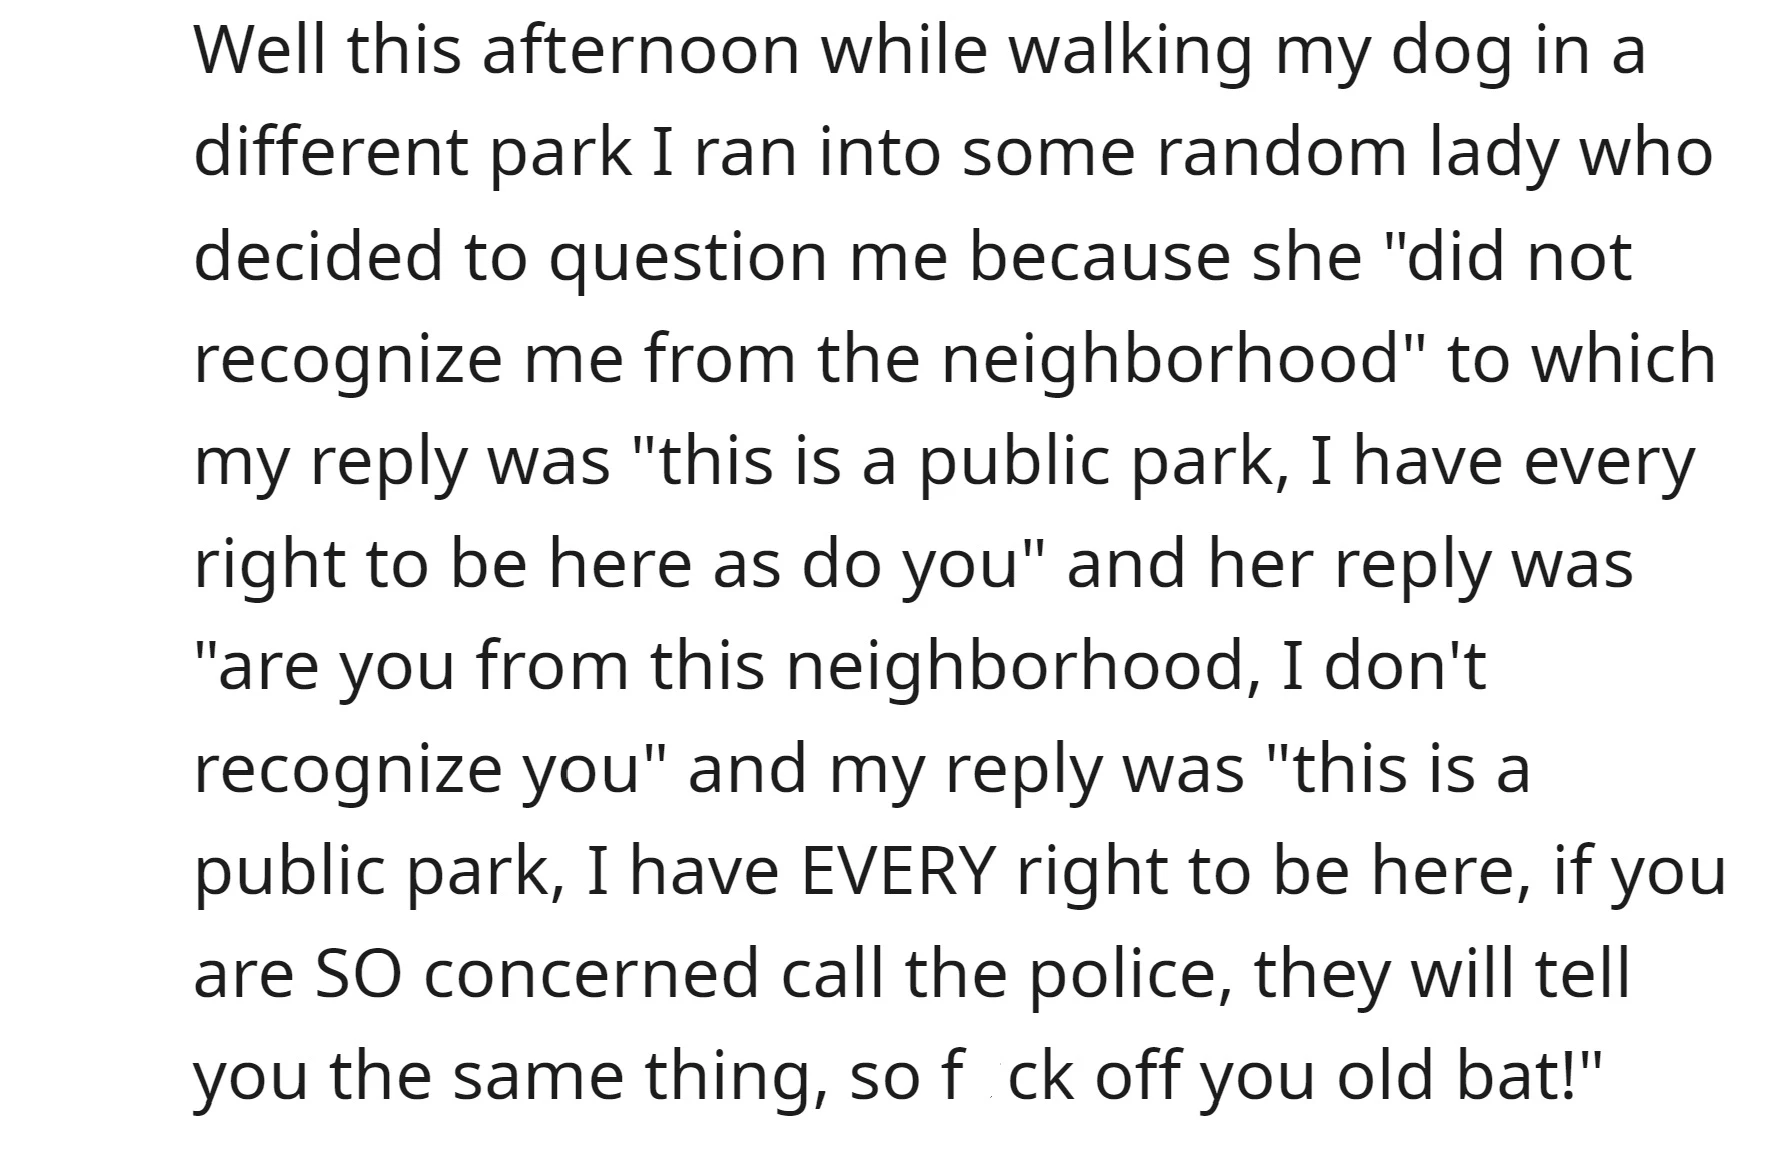 I think that lady owns the park